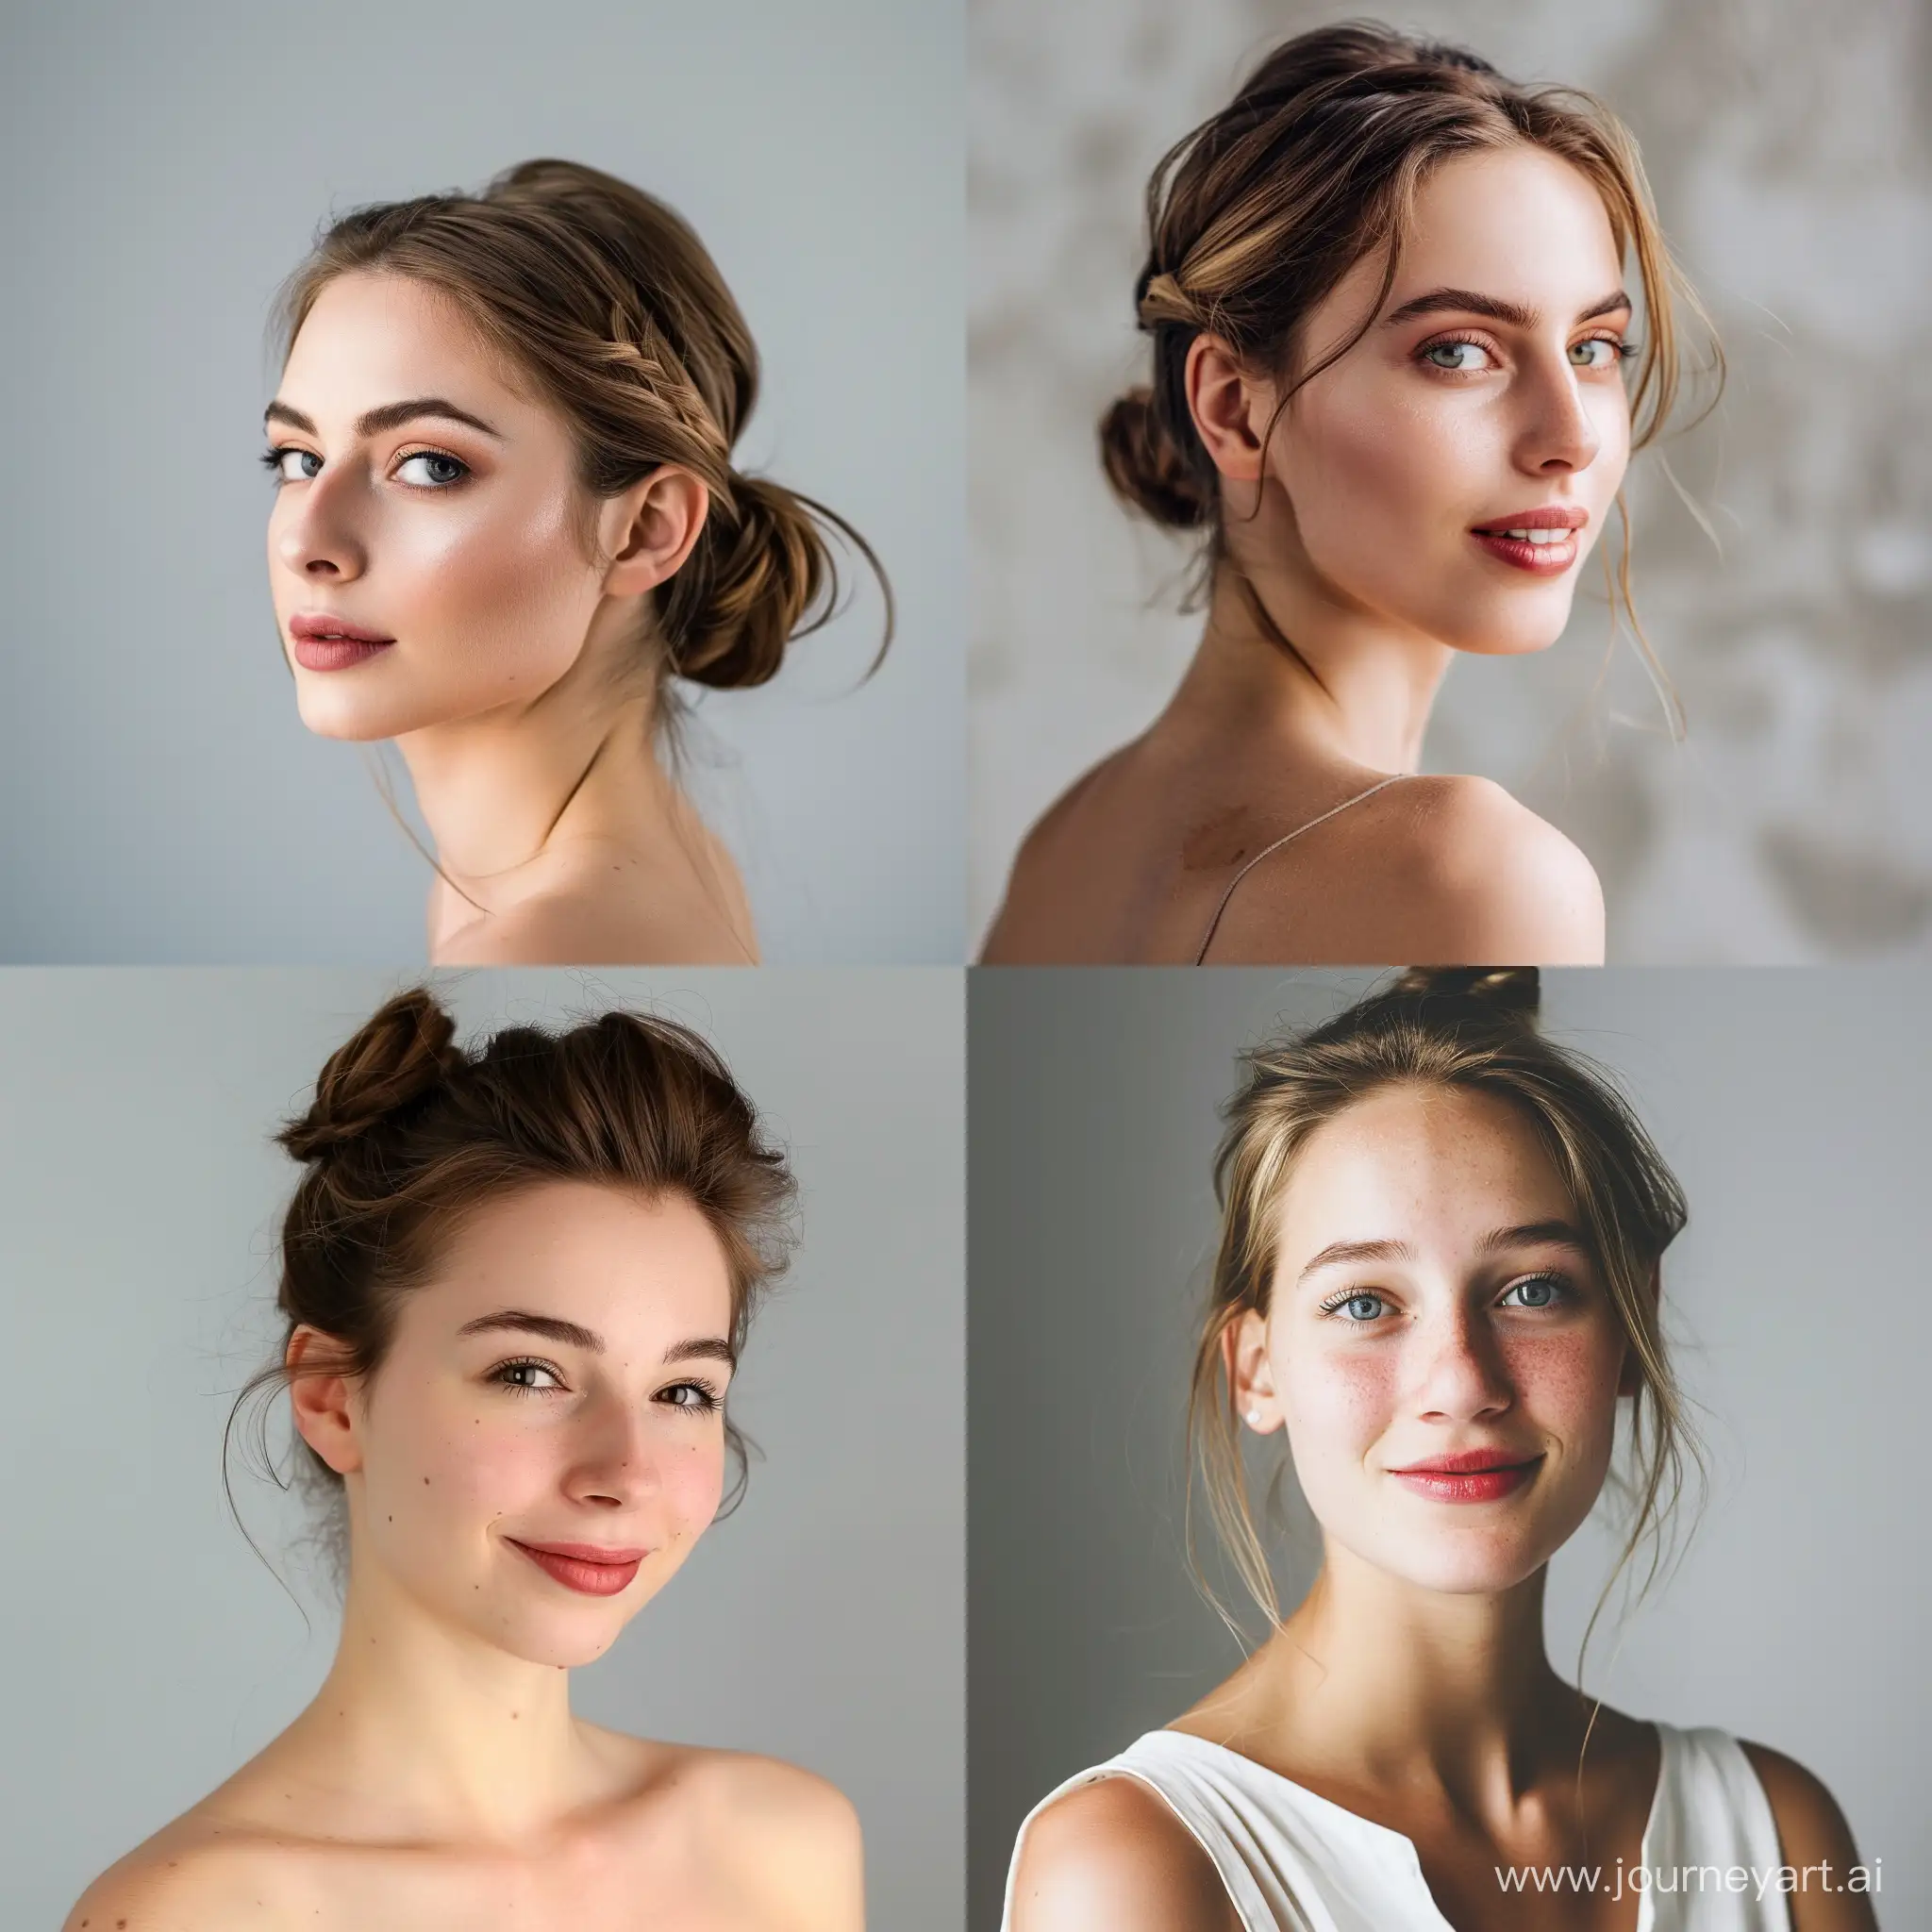 Elegant-20YearOld-Woman-with-Chignon-Hair-in-Cinematic-View